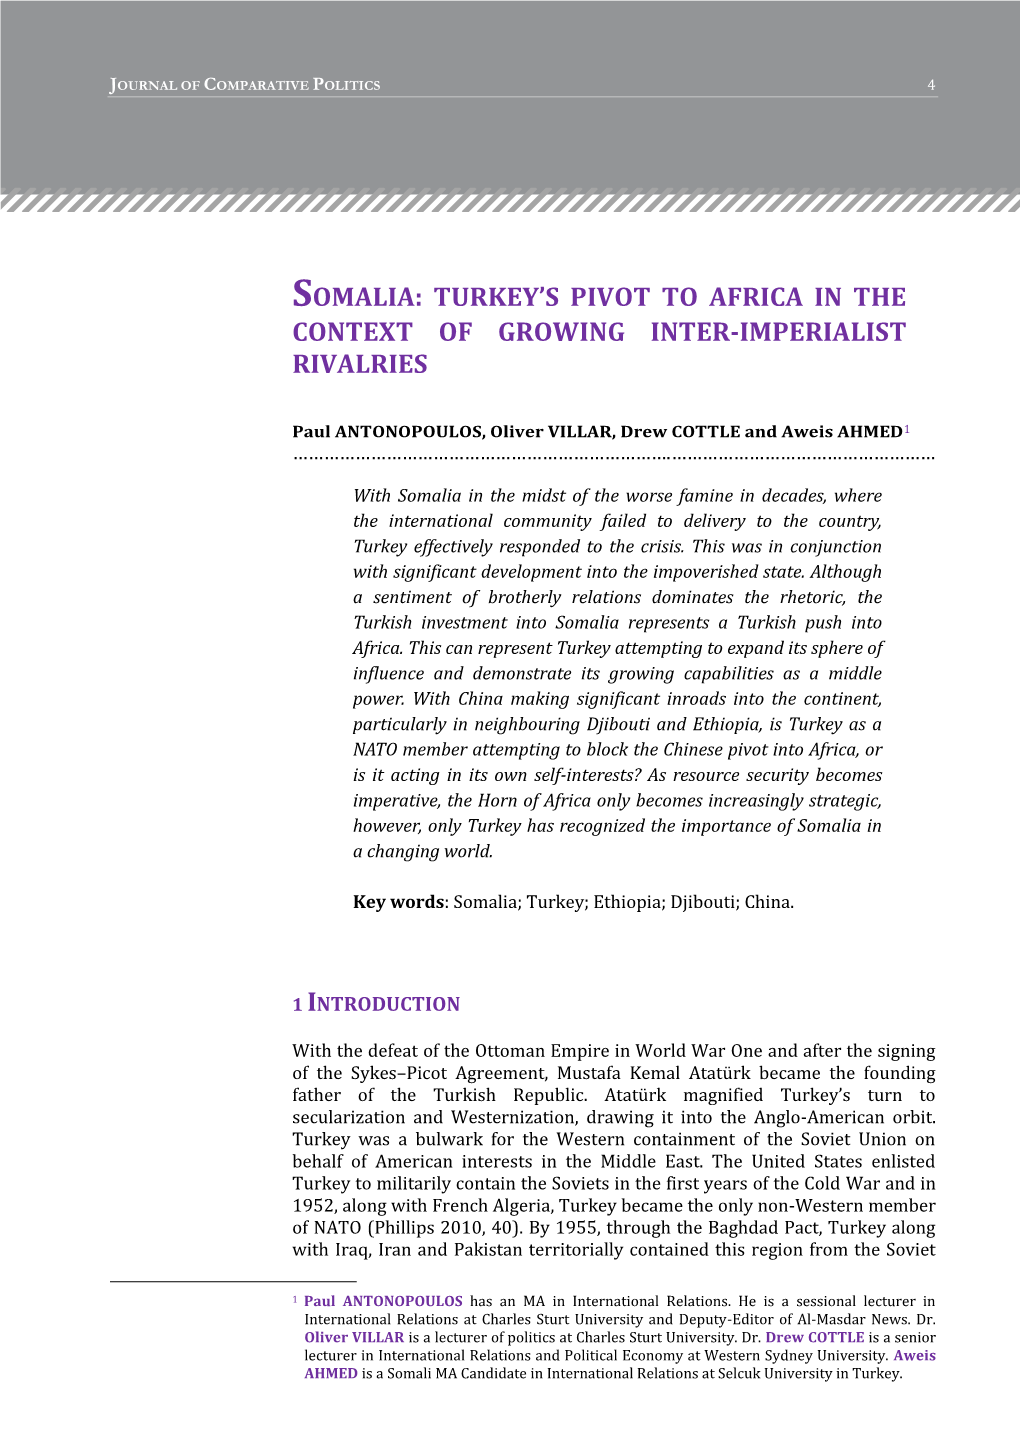 Somalia: Turkey’S Pivot to Africa in the Context of Growing Inter-Imperialist Rivalries